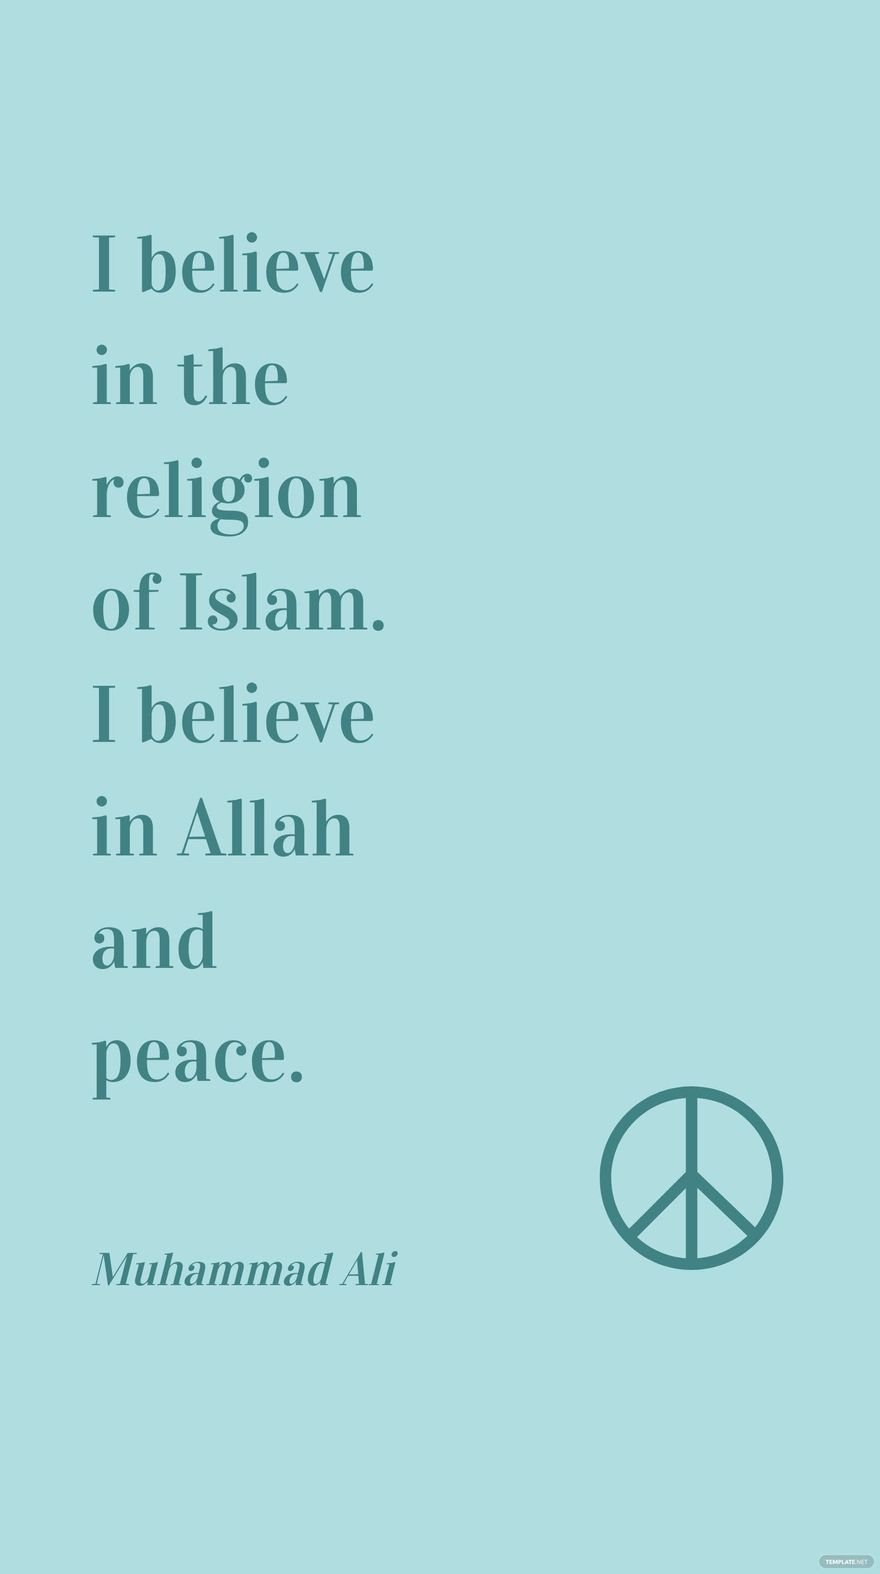 Muhammad Ali - I believe in the religion of Islam. I believe in Allah and peace.